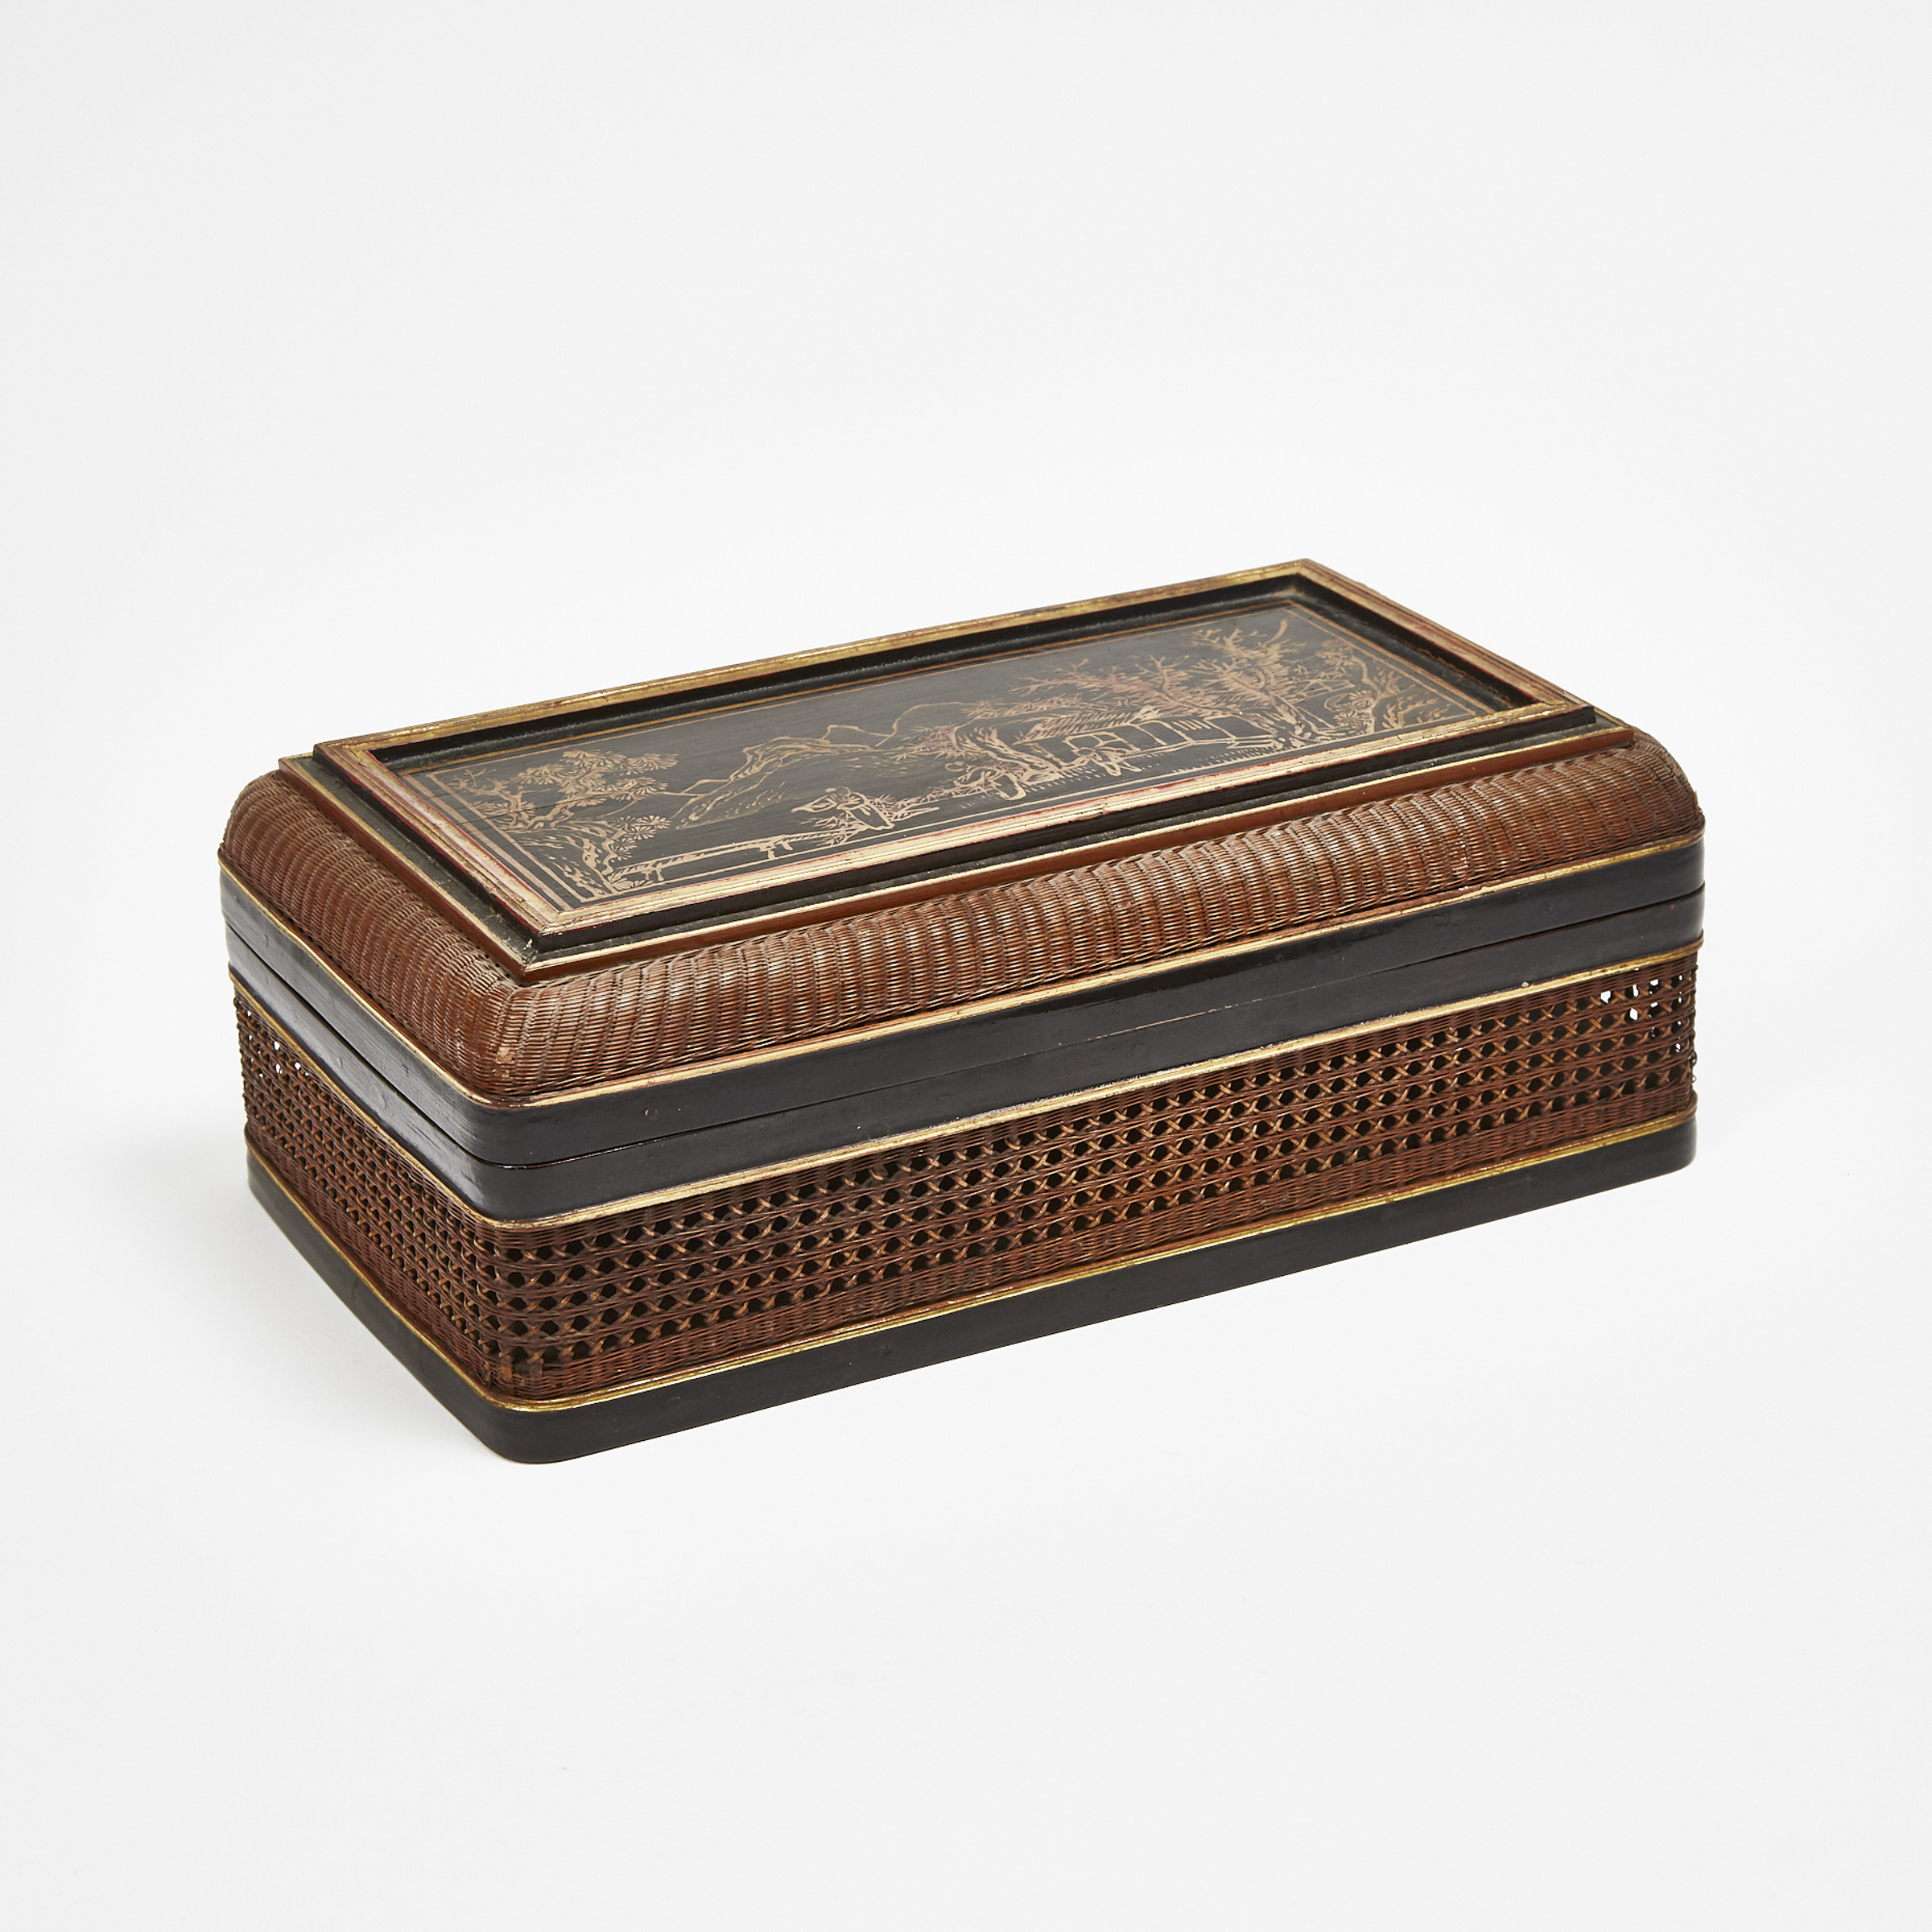 A Bamboo Woven Gilt and Black Lacquer Painted Box